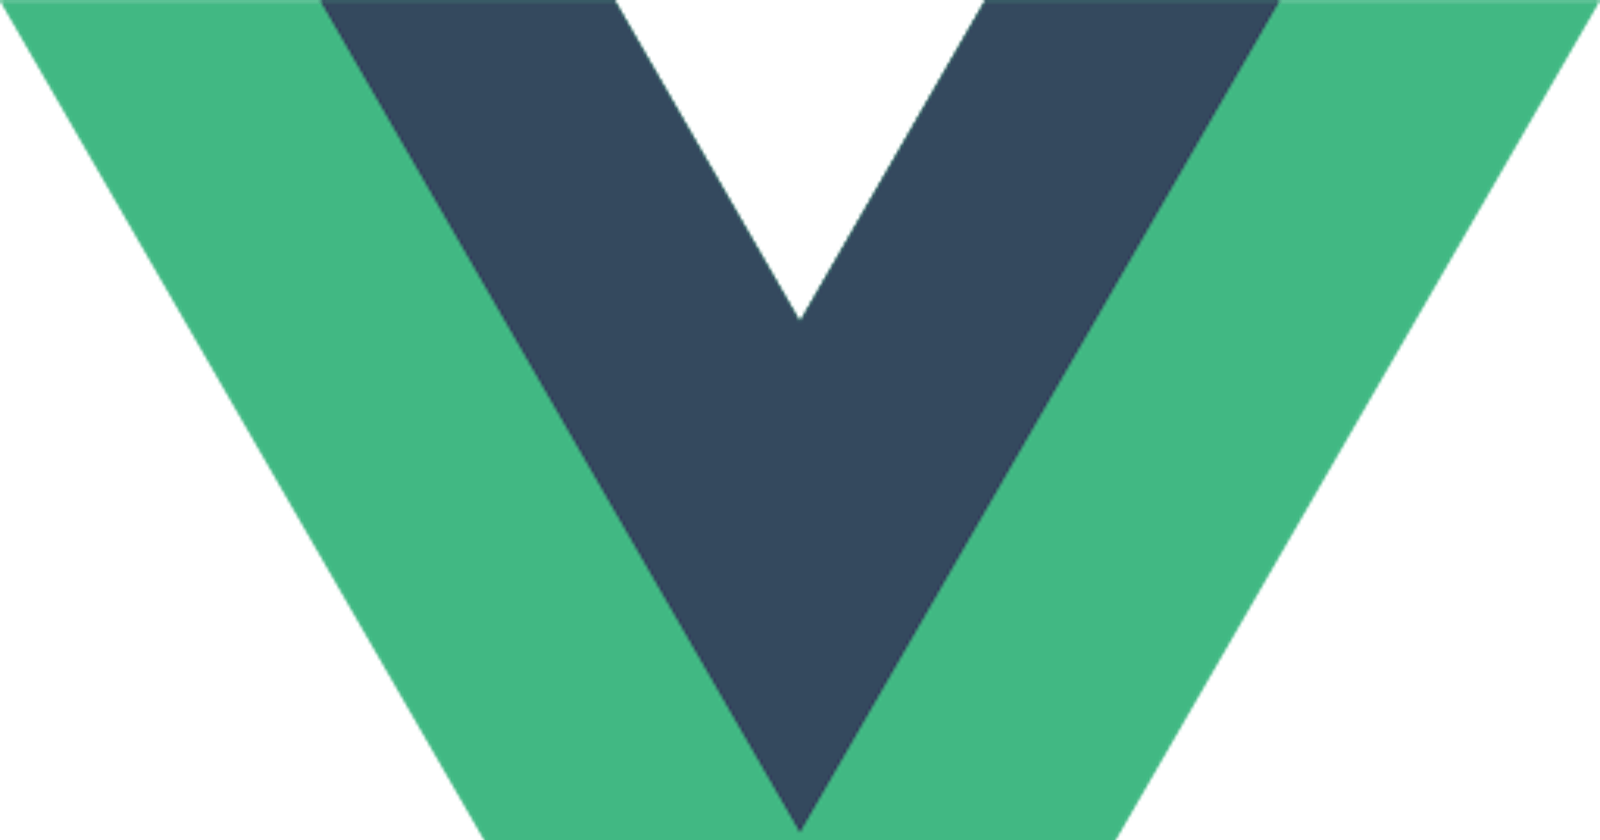 Add VueJS to your Laravel Mix workflow